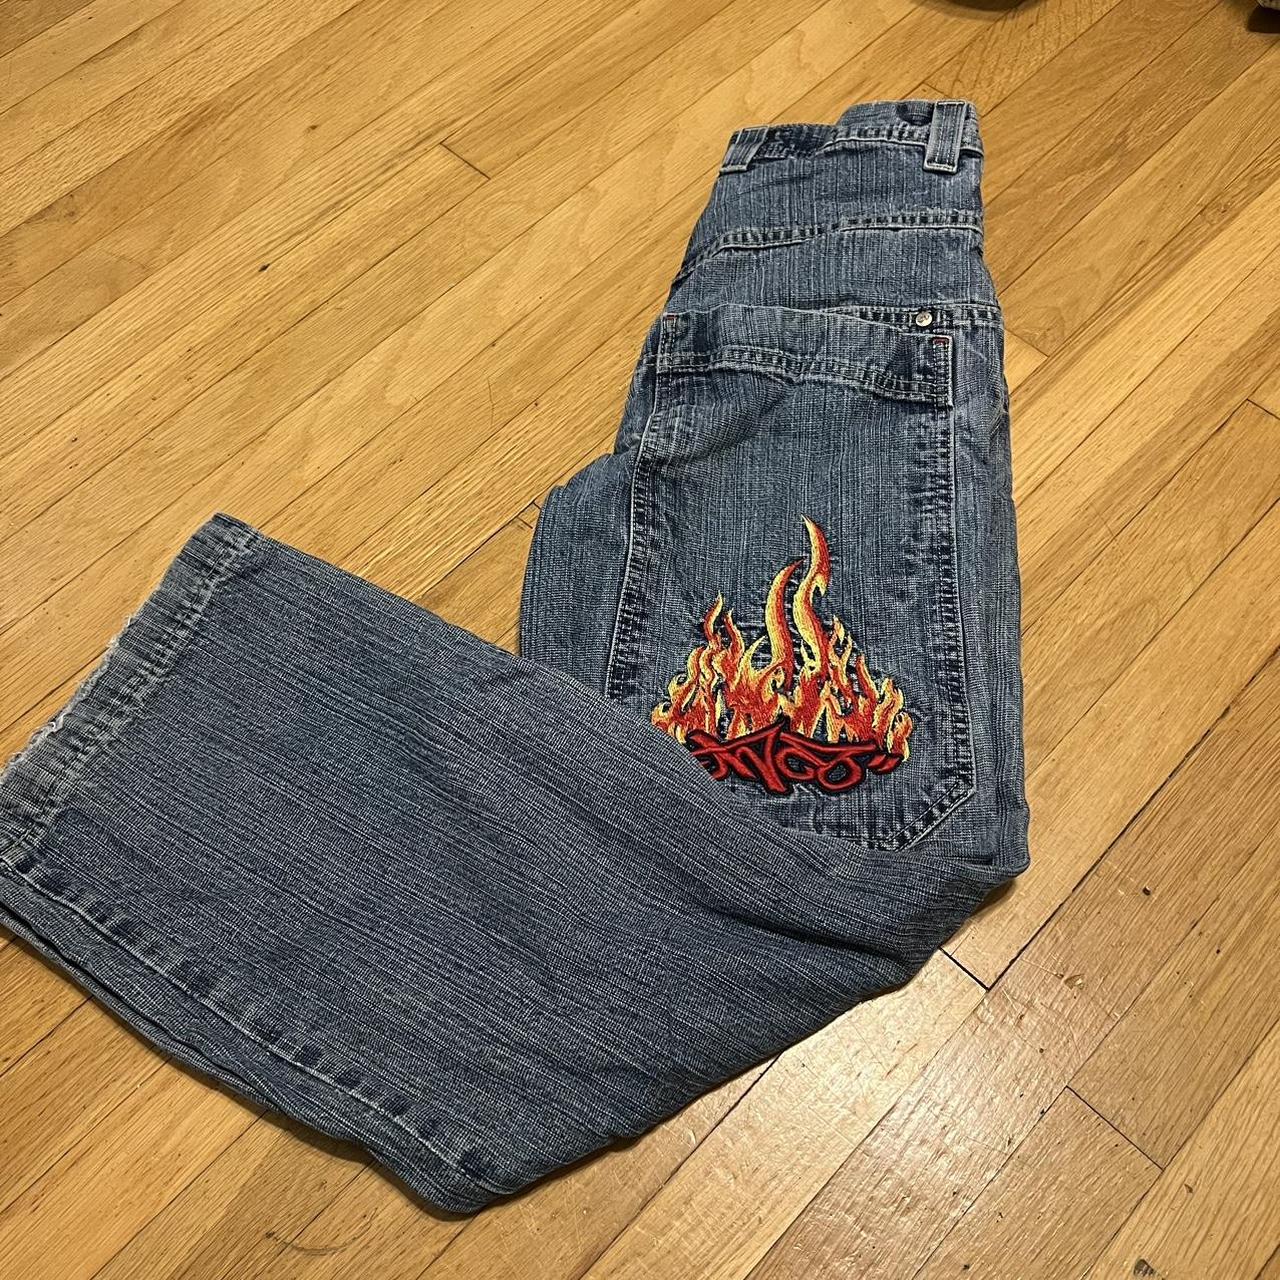 JNCO Women's Navy and Blue Jeans | Depop